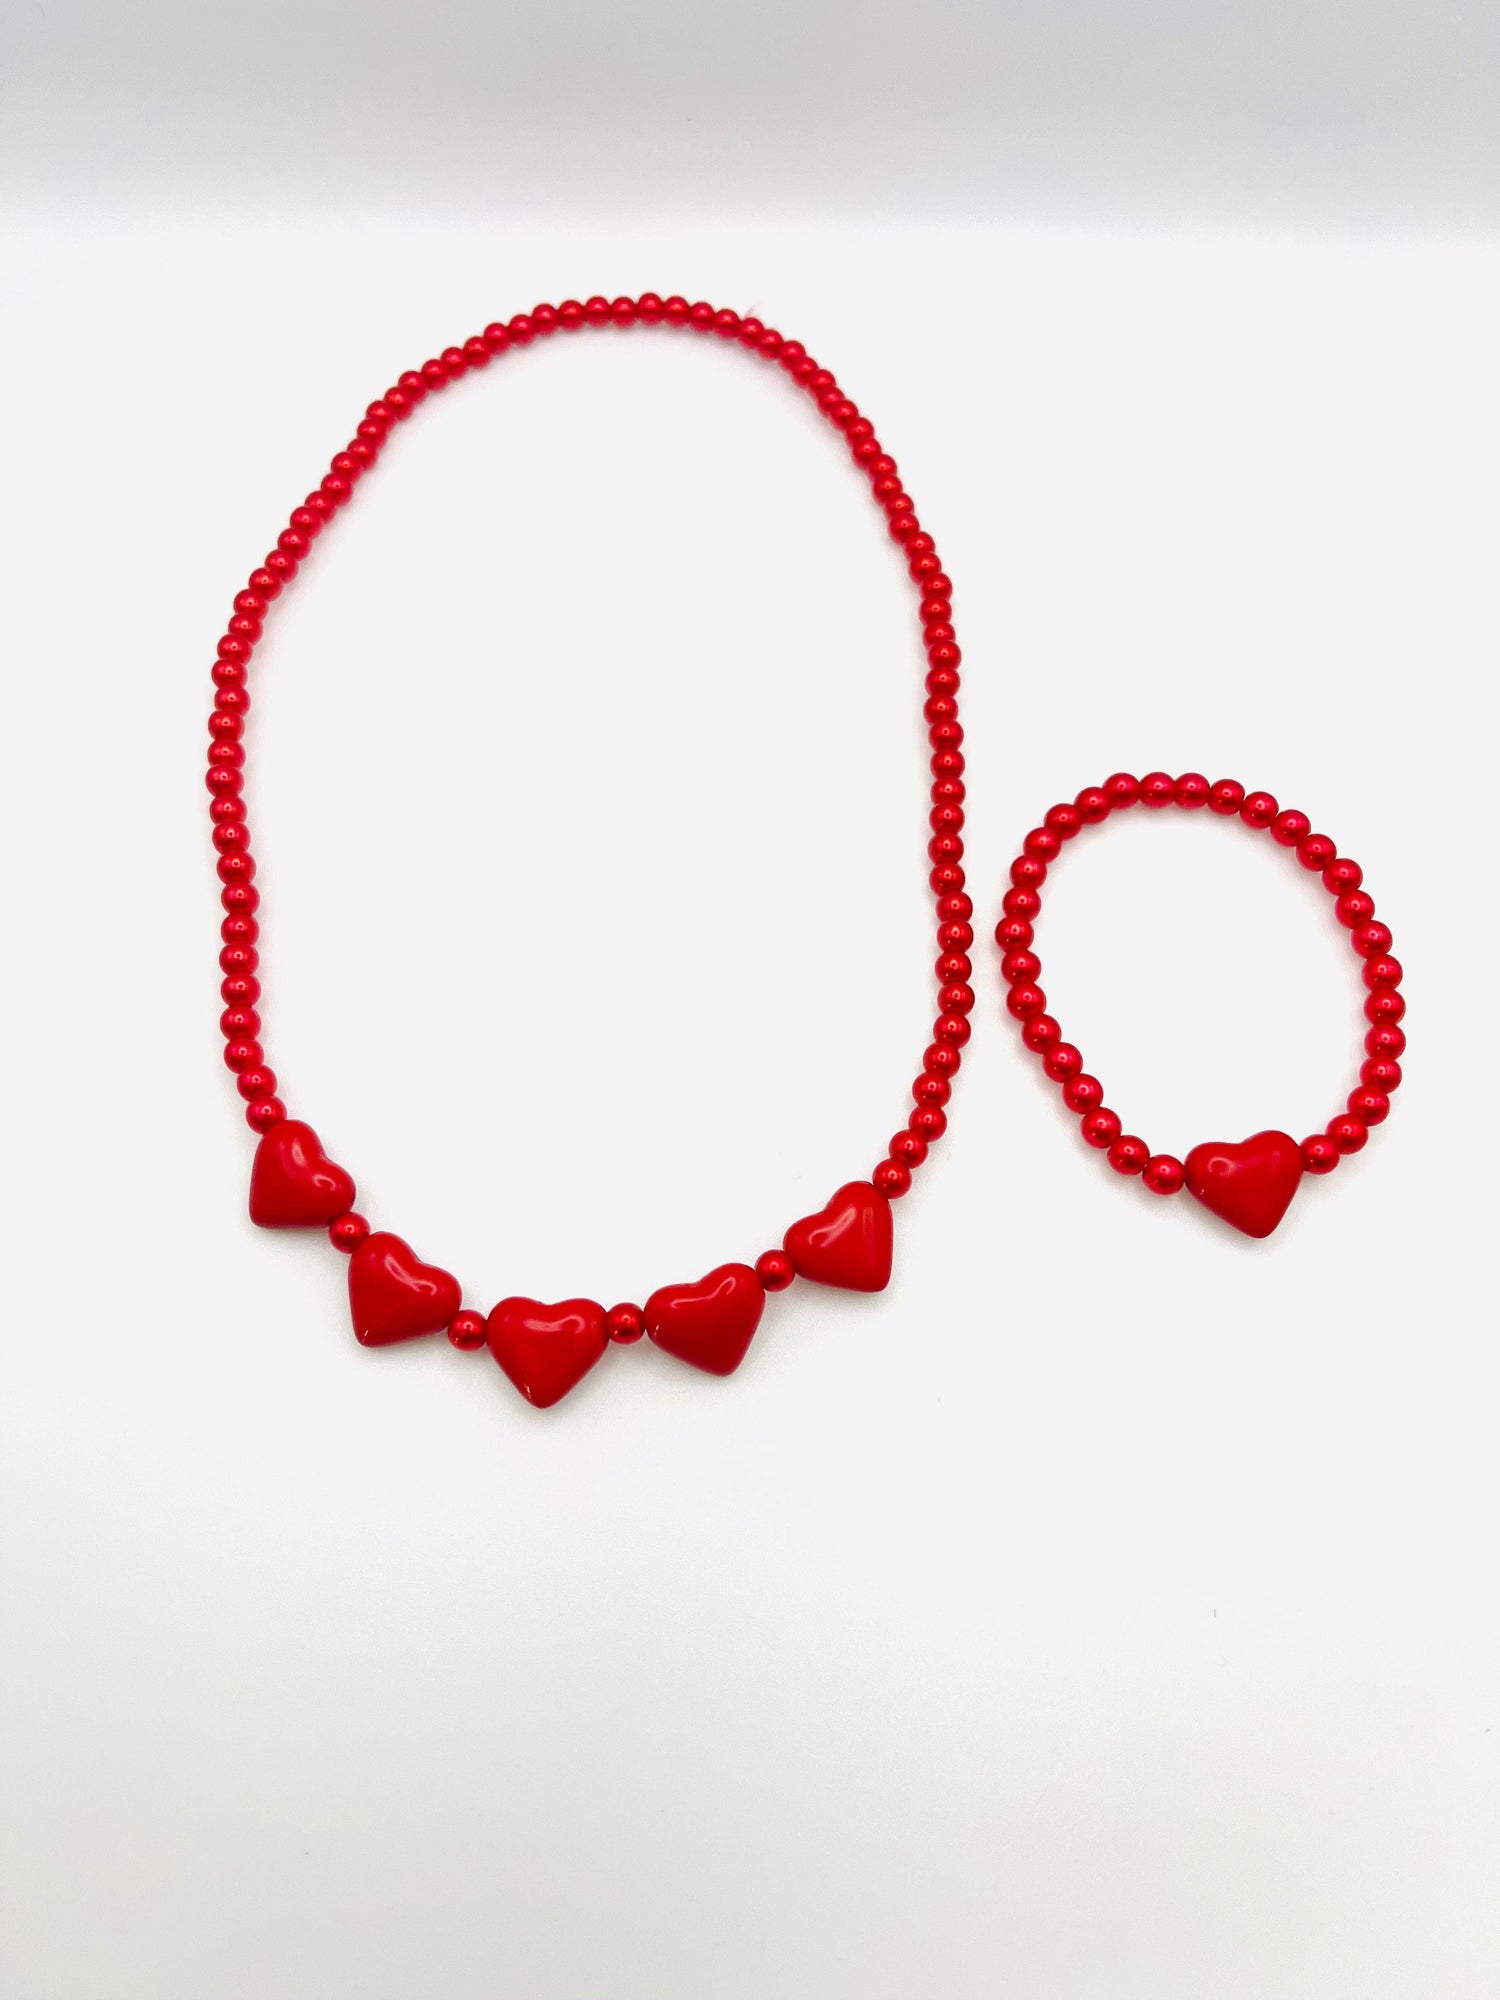 Fashionably, BBK! Accessories Valentine Red Girls Beaded Heart Necklace and Bracelet Set